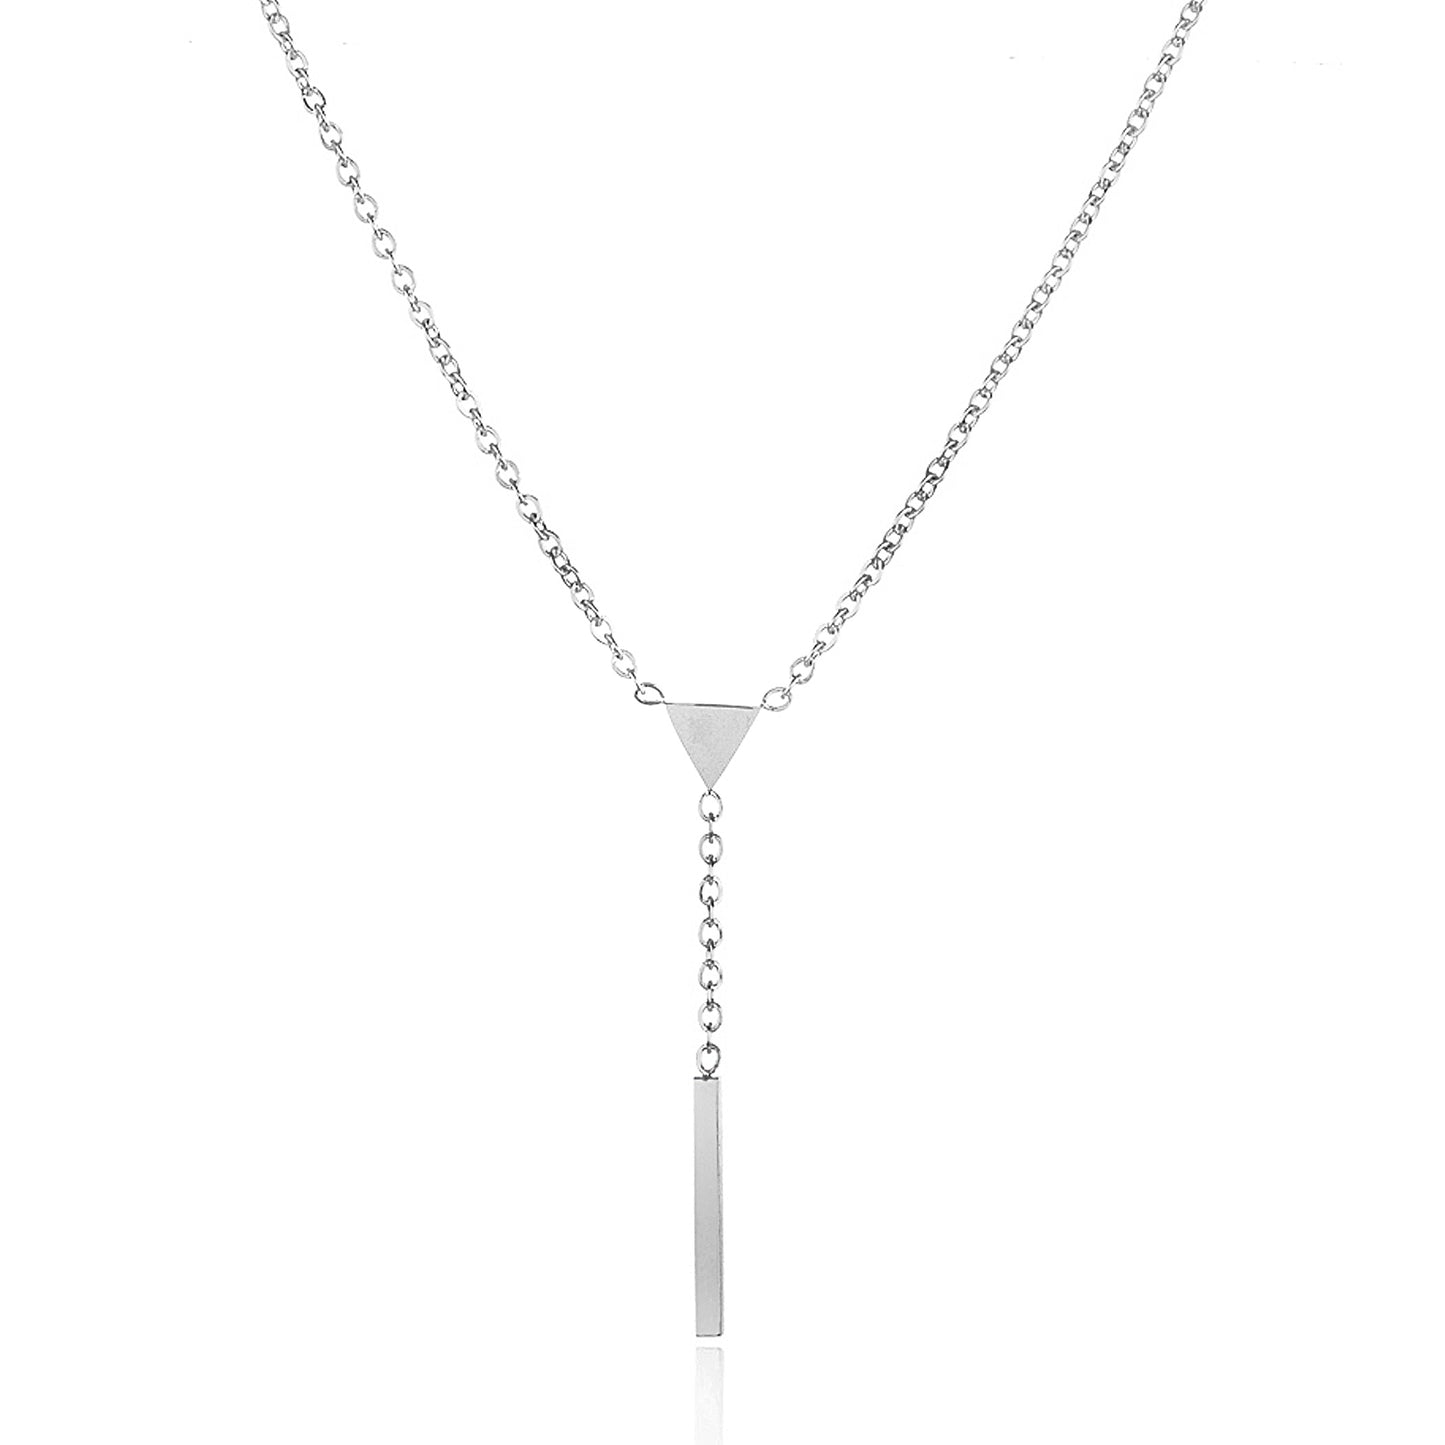 ELYA Women's High Polished Triangle Bar Drop Stainless Steel Cable Chain Necklace